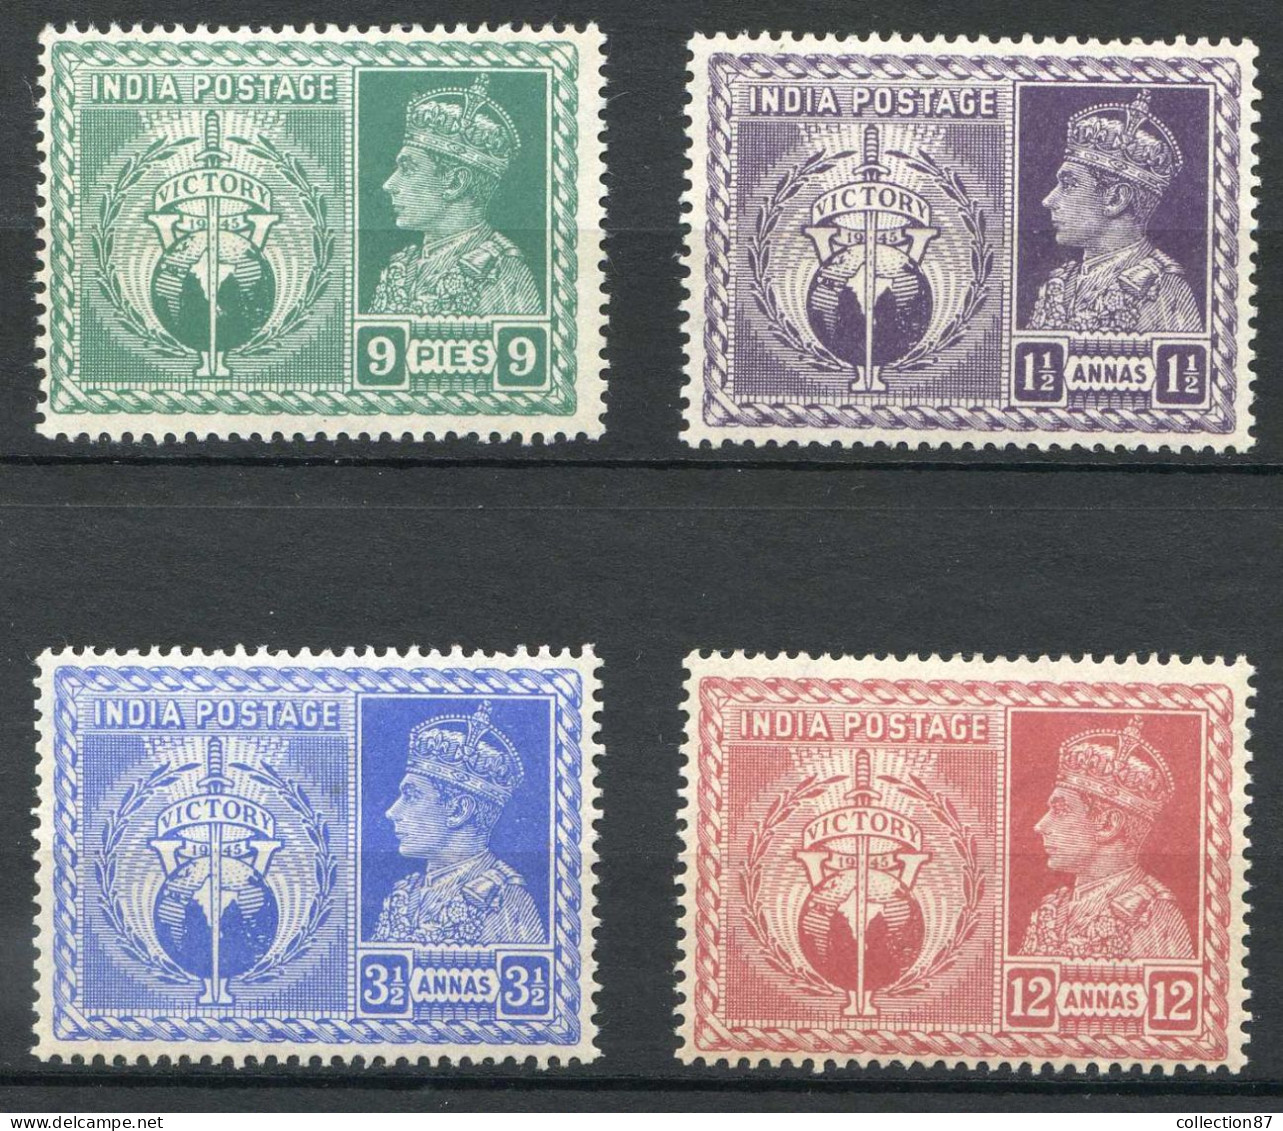 REF 001 > INDE ANGLAISE < N° 174 à 177 * * < Neuf Luxe -- MNH * * -- George VI < Victoire - 1936-47  George VI